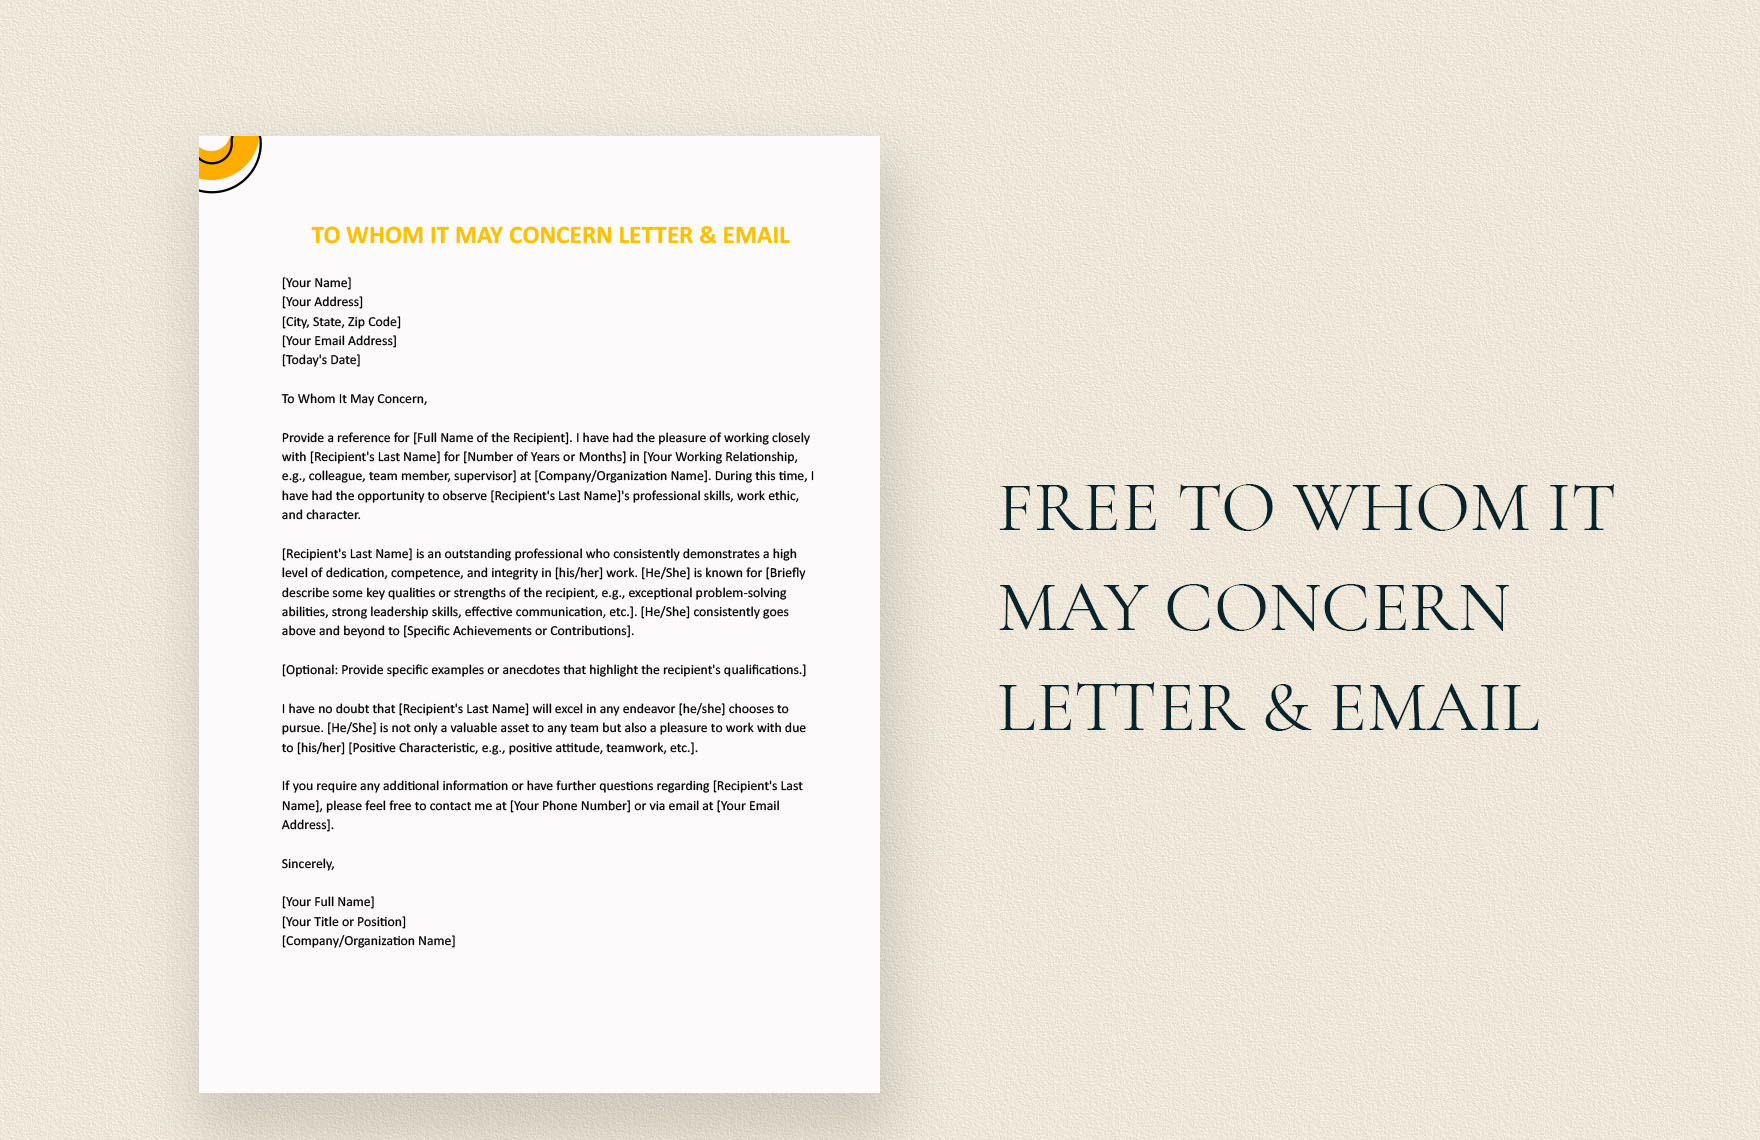 To Whom It May Concern Letter & Email